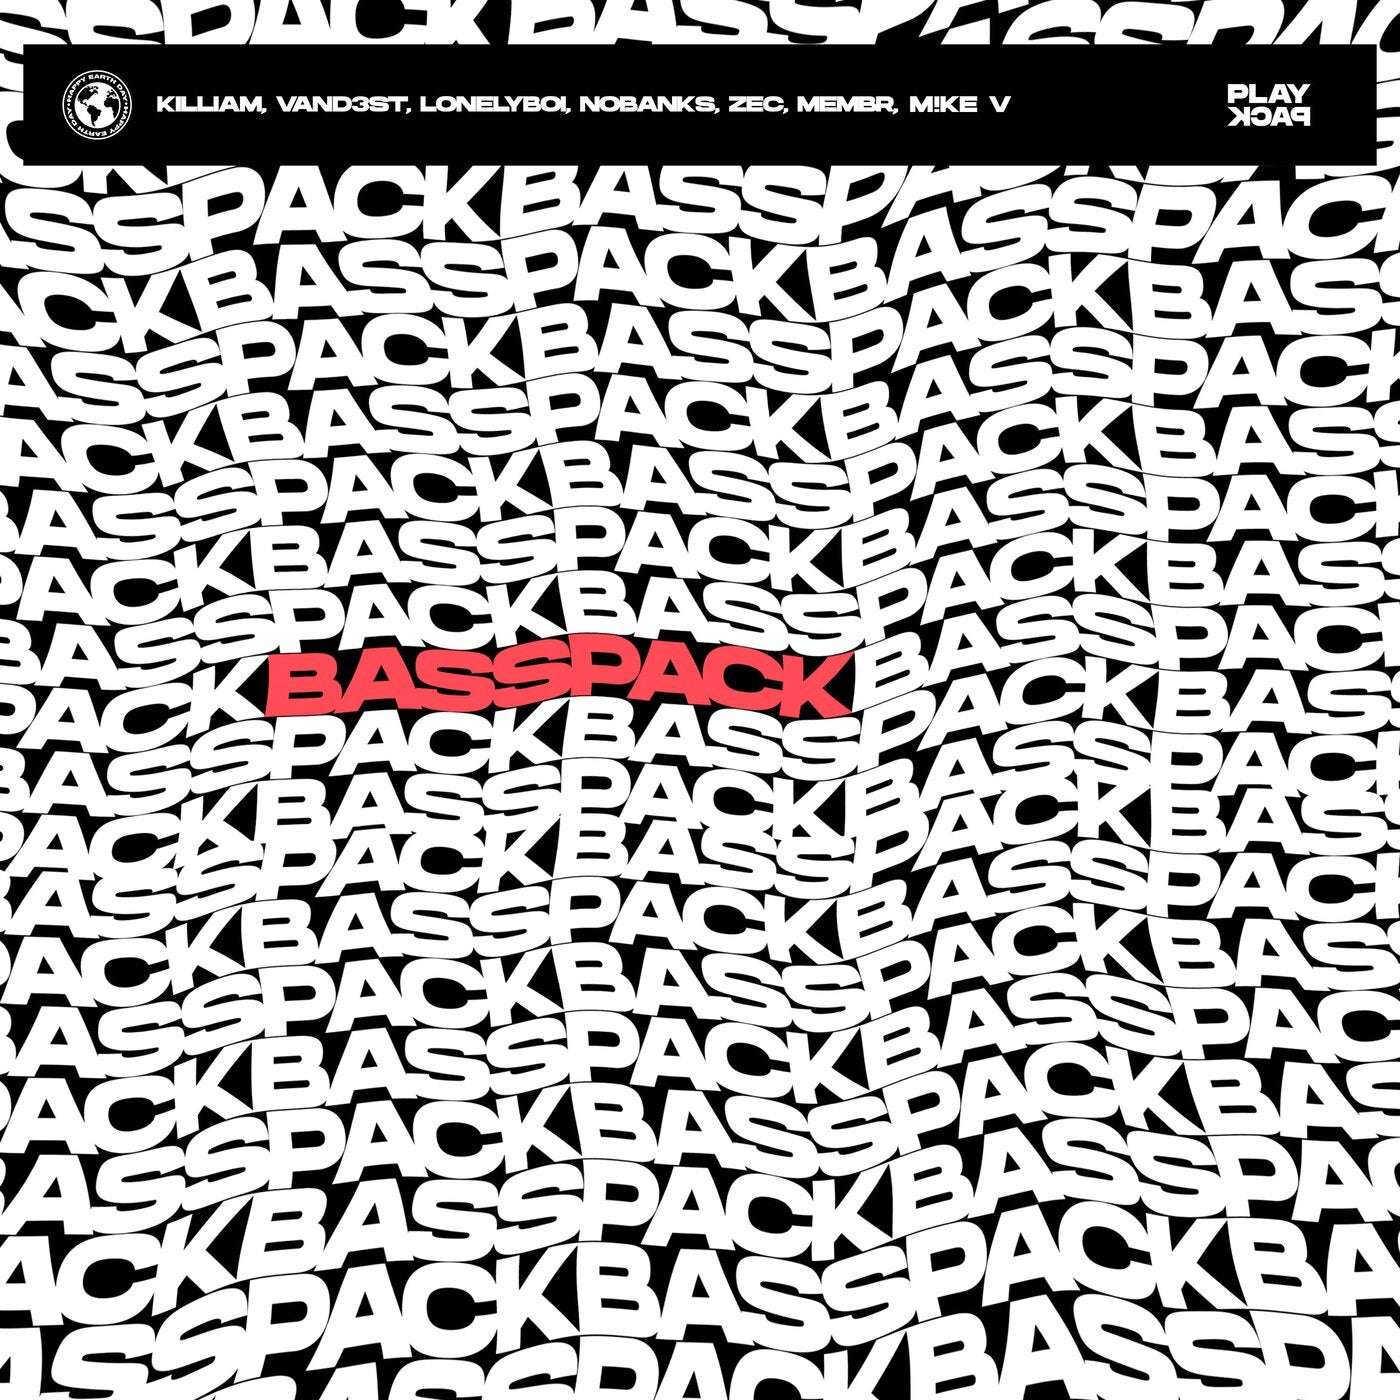 PLAYPACK Presents : BASS PACK Vol.2